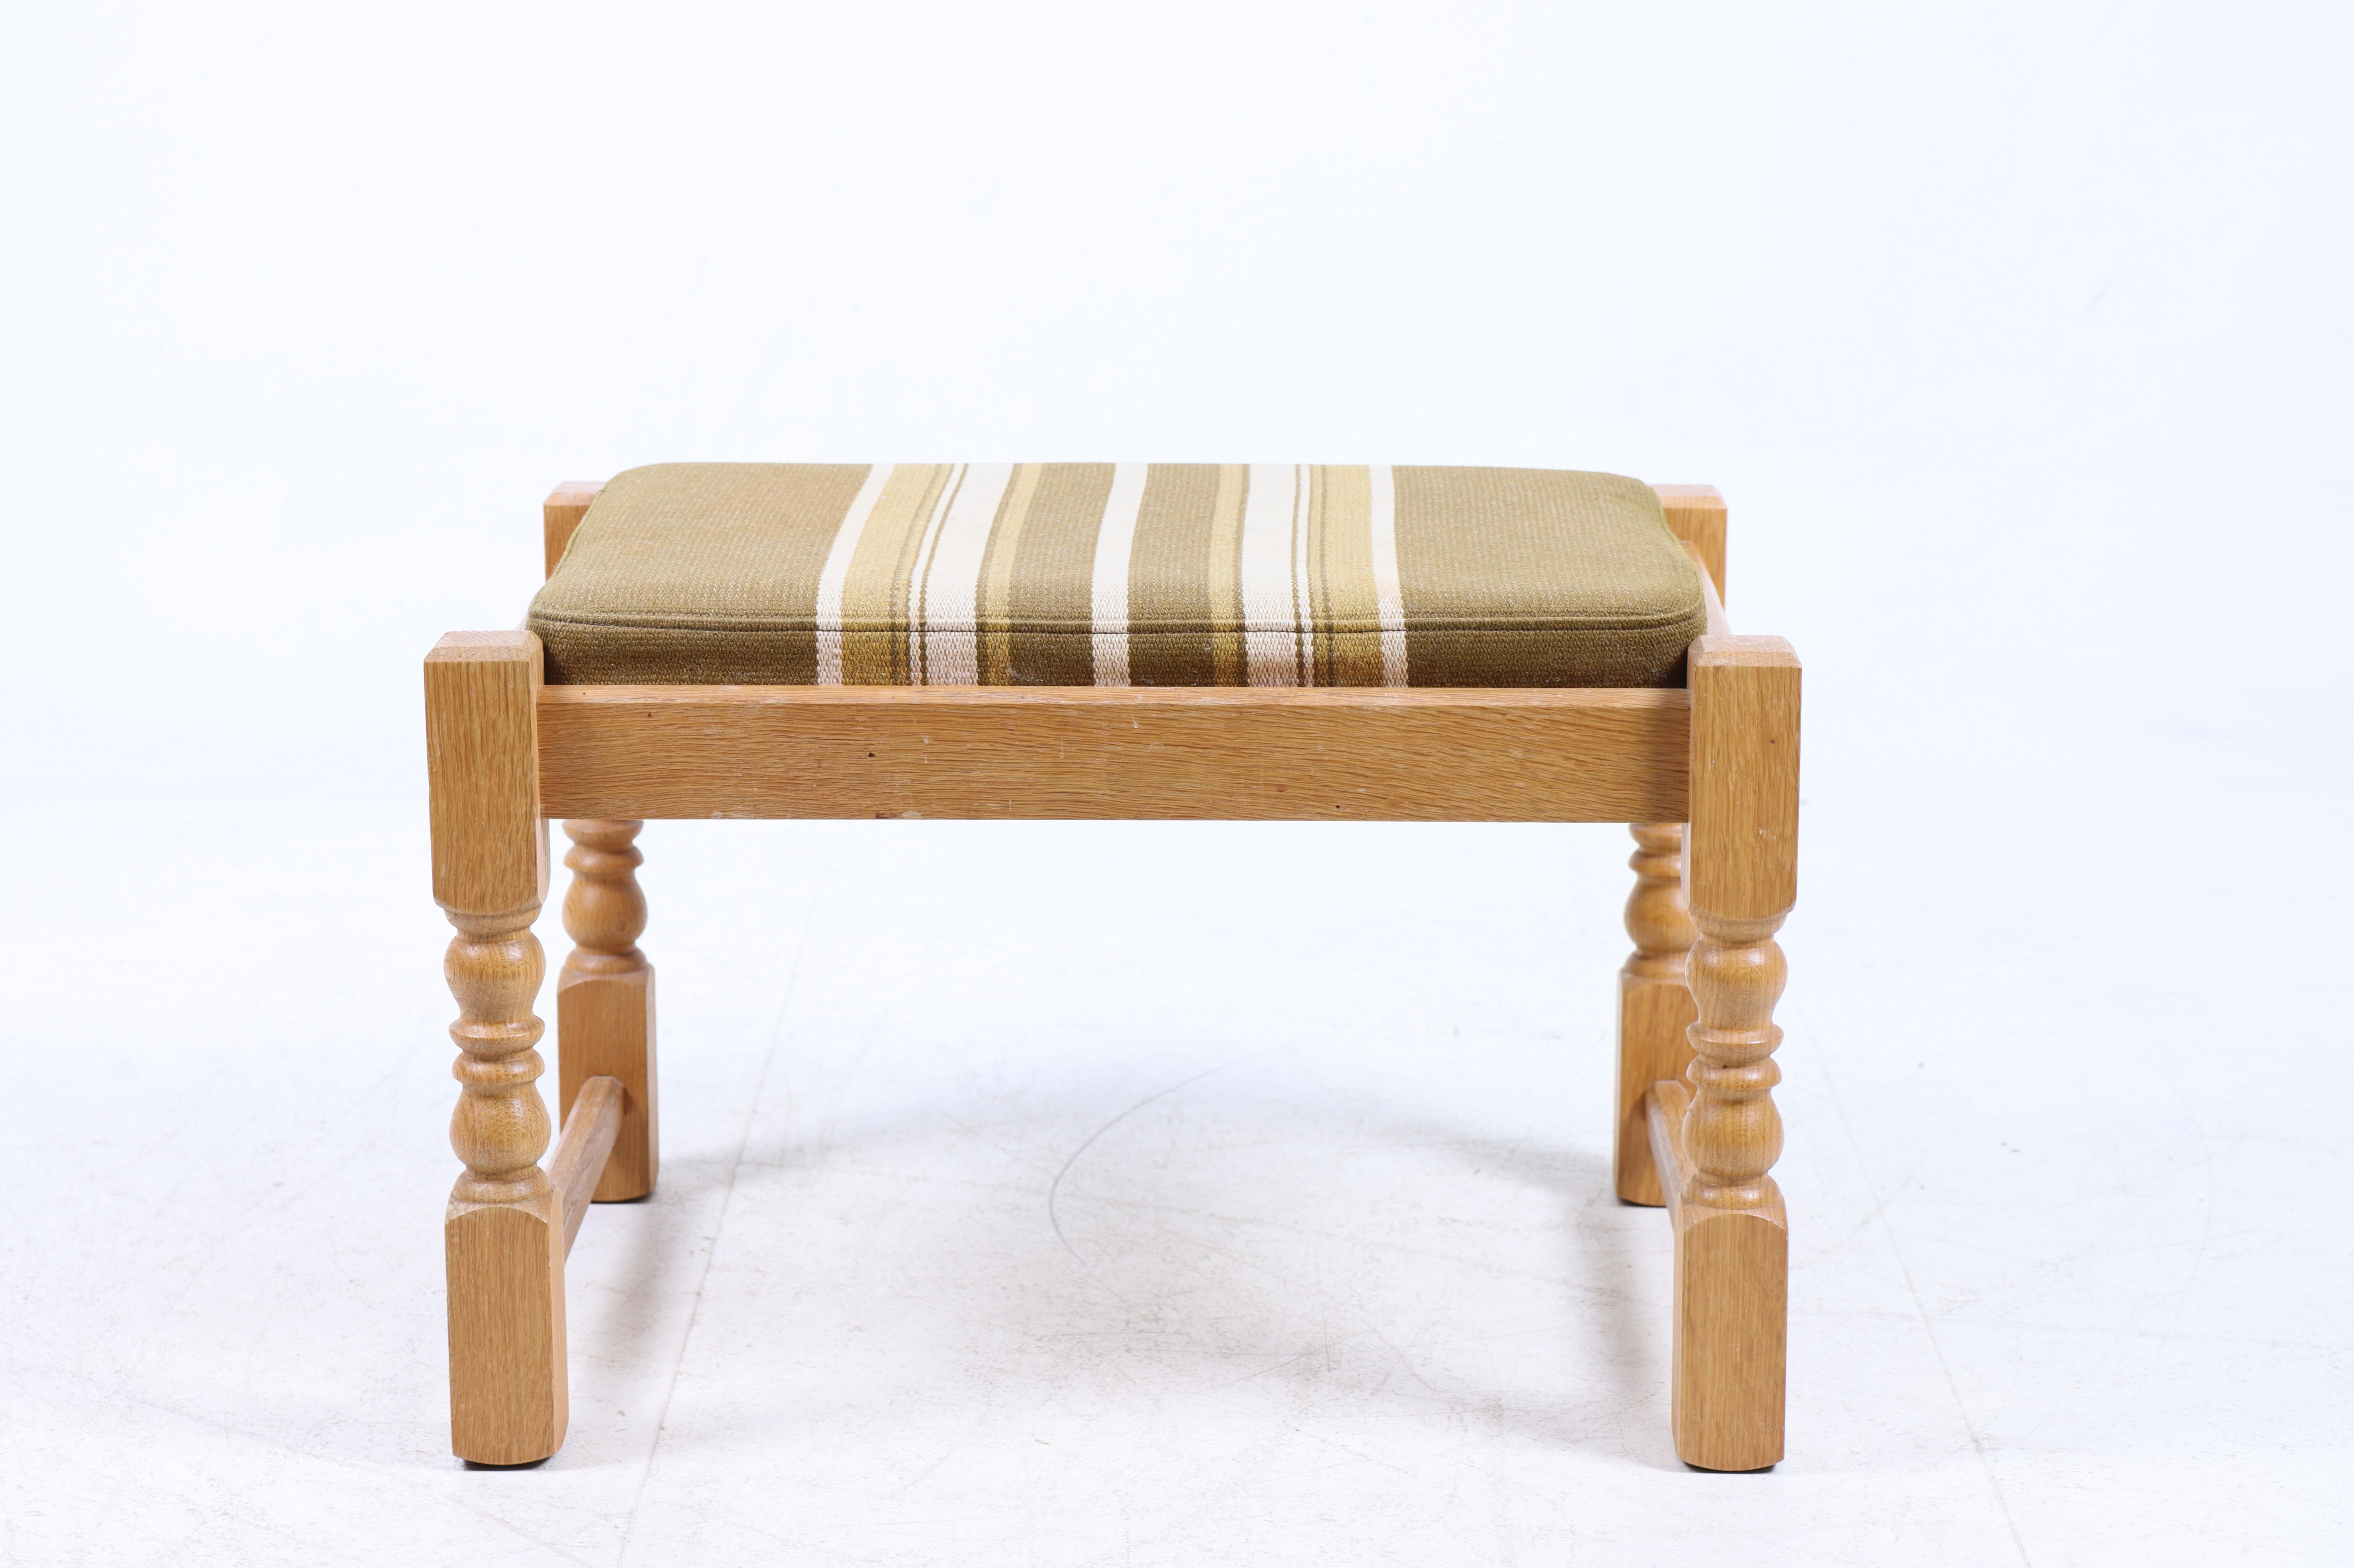 Stool in solid oak and fabric, designed made in Denmark, 1950s.